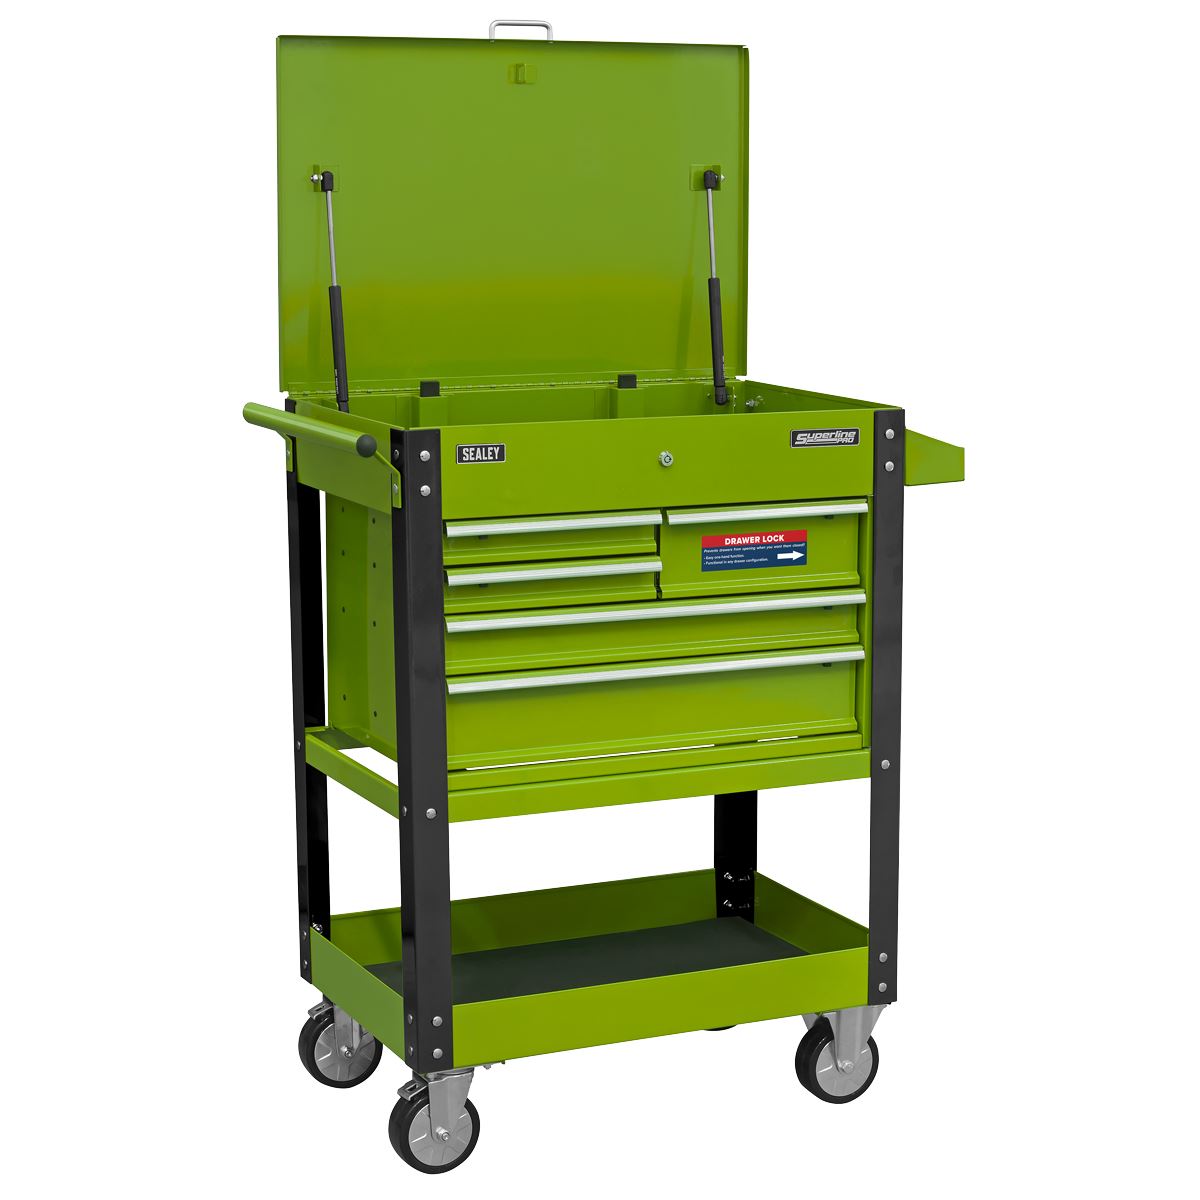 Sealey Superline Pro Heavy-Duty Mobile Tool & Parts Trolley with 5 Drawers and Lockable Top- Hi-Vis Green